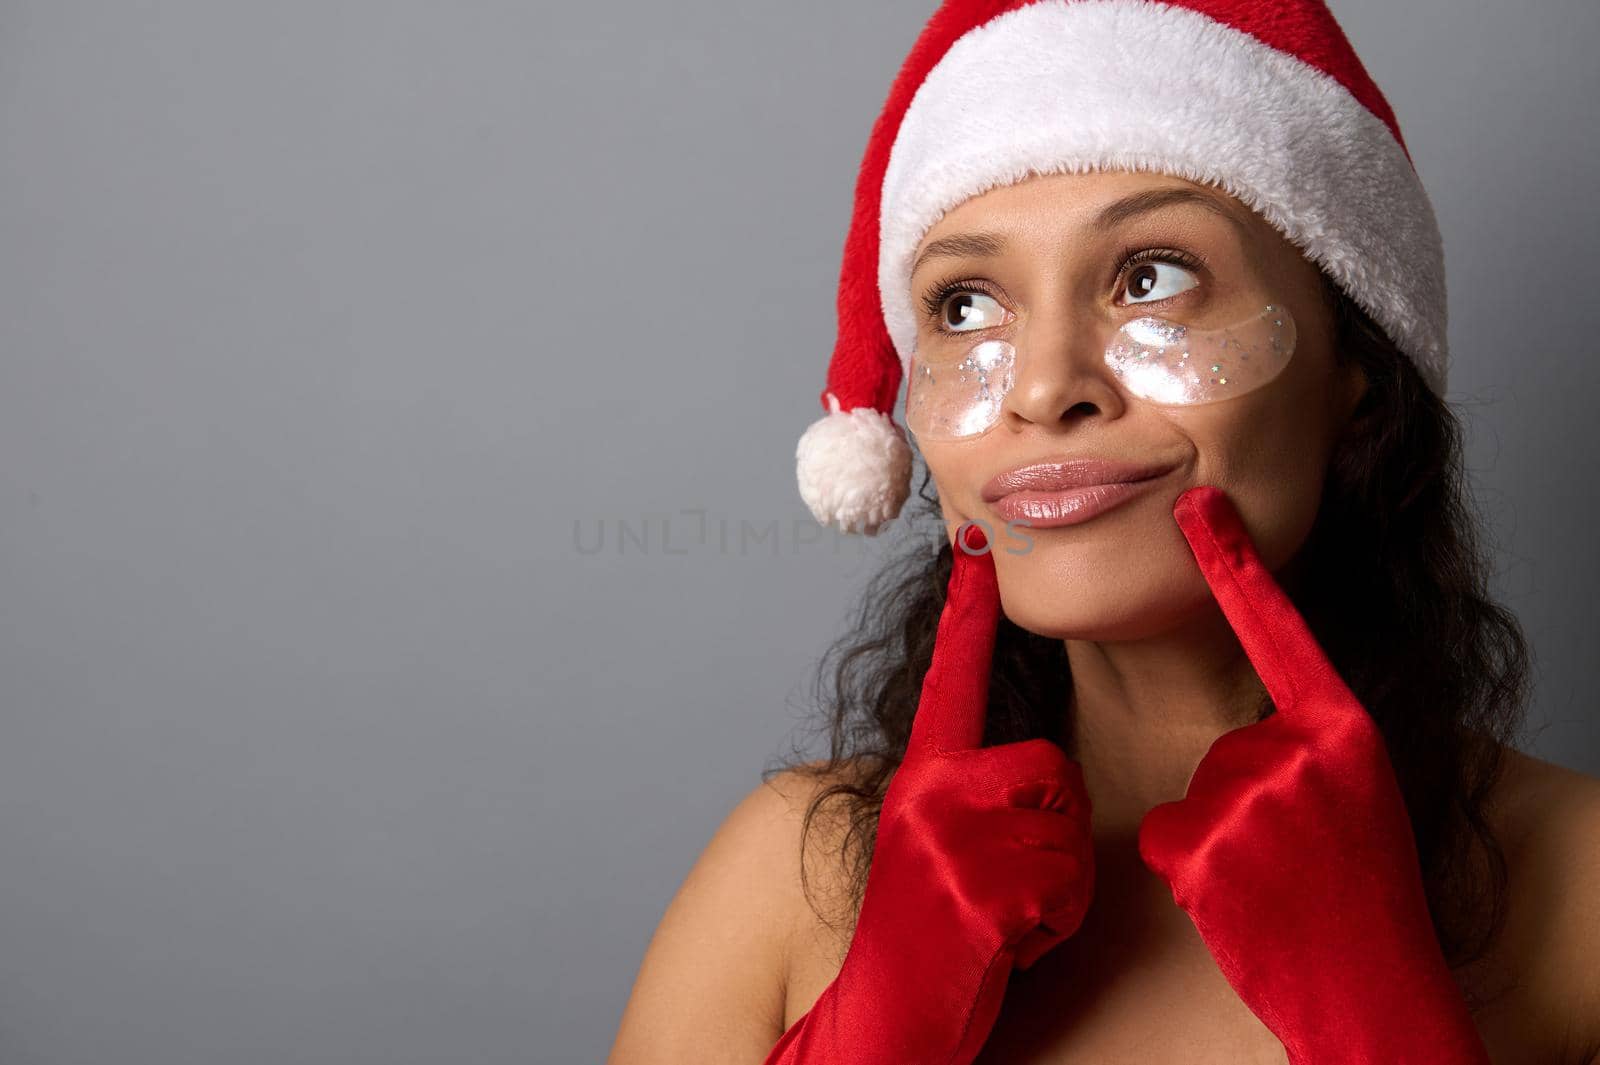 Pretty woman with smoothing eye patches , wearing Santa Claus hat and red satin gloves, presses her fingers to her lips and smiles, looking at copy space on gray background. Spa, skin care concept